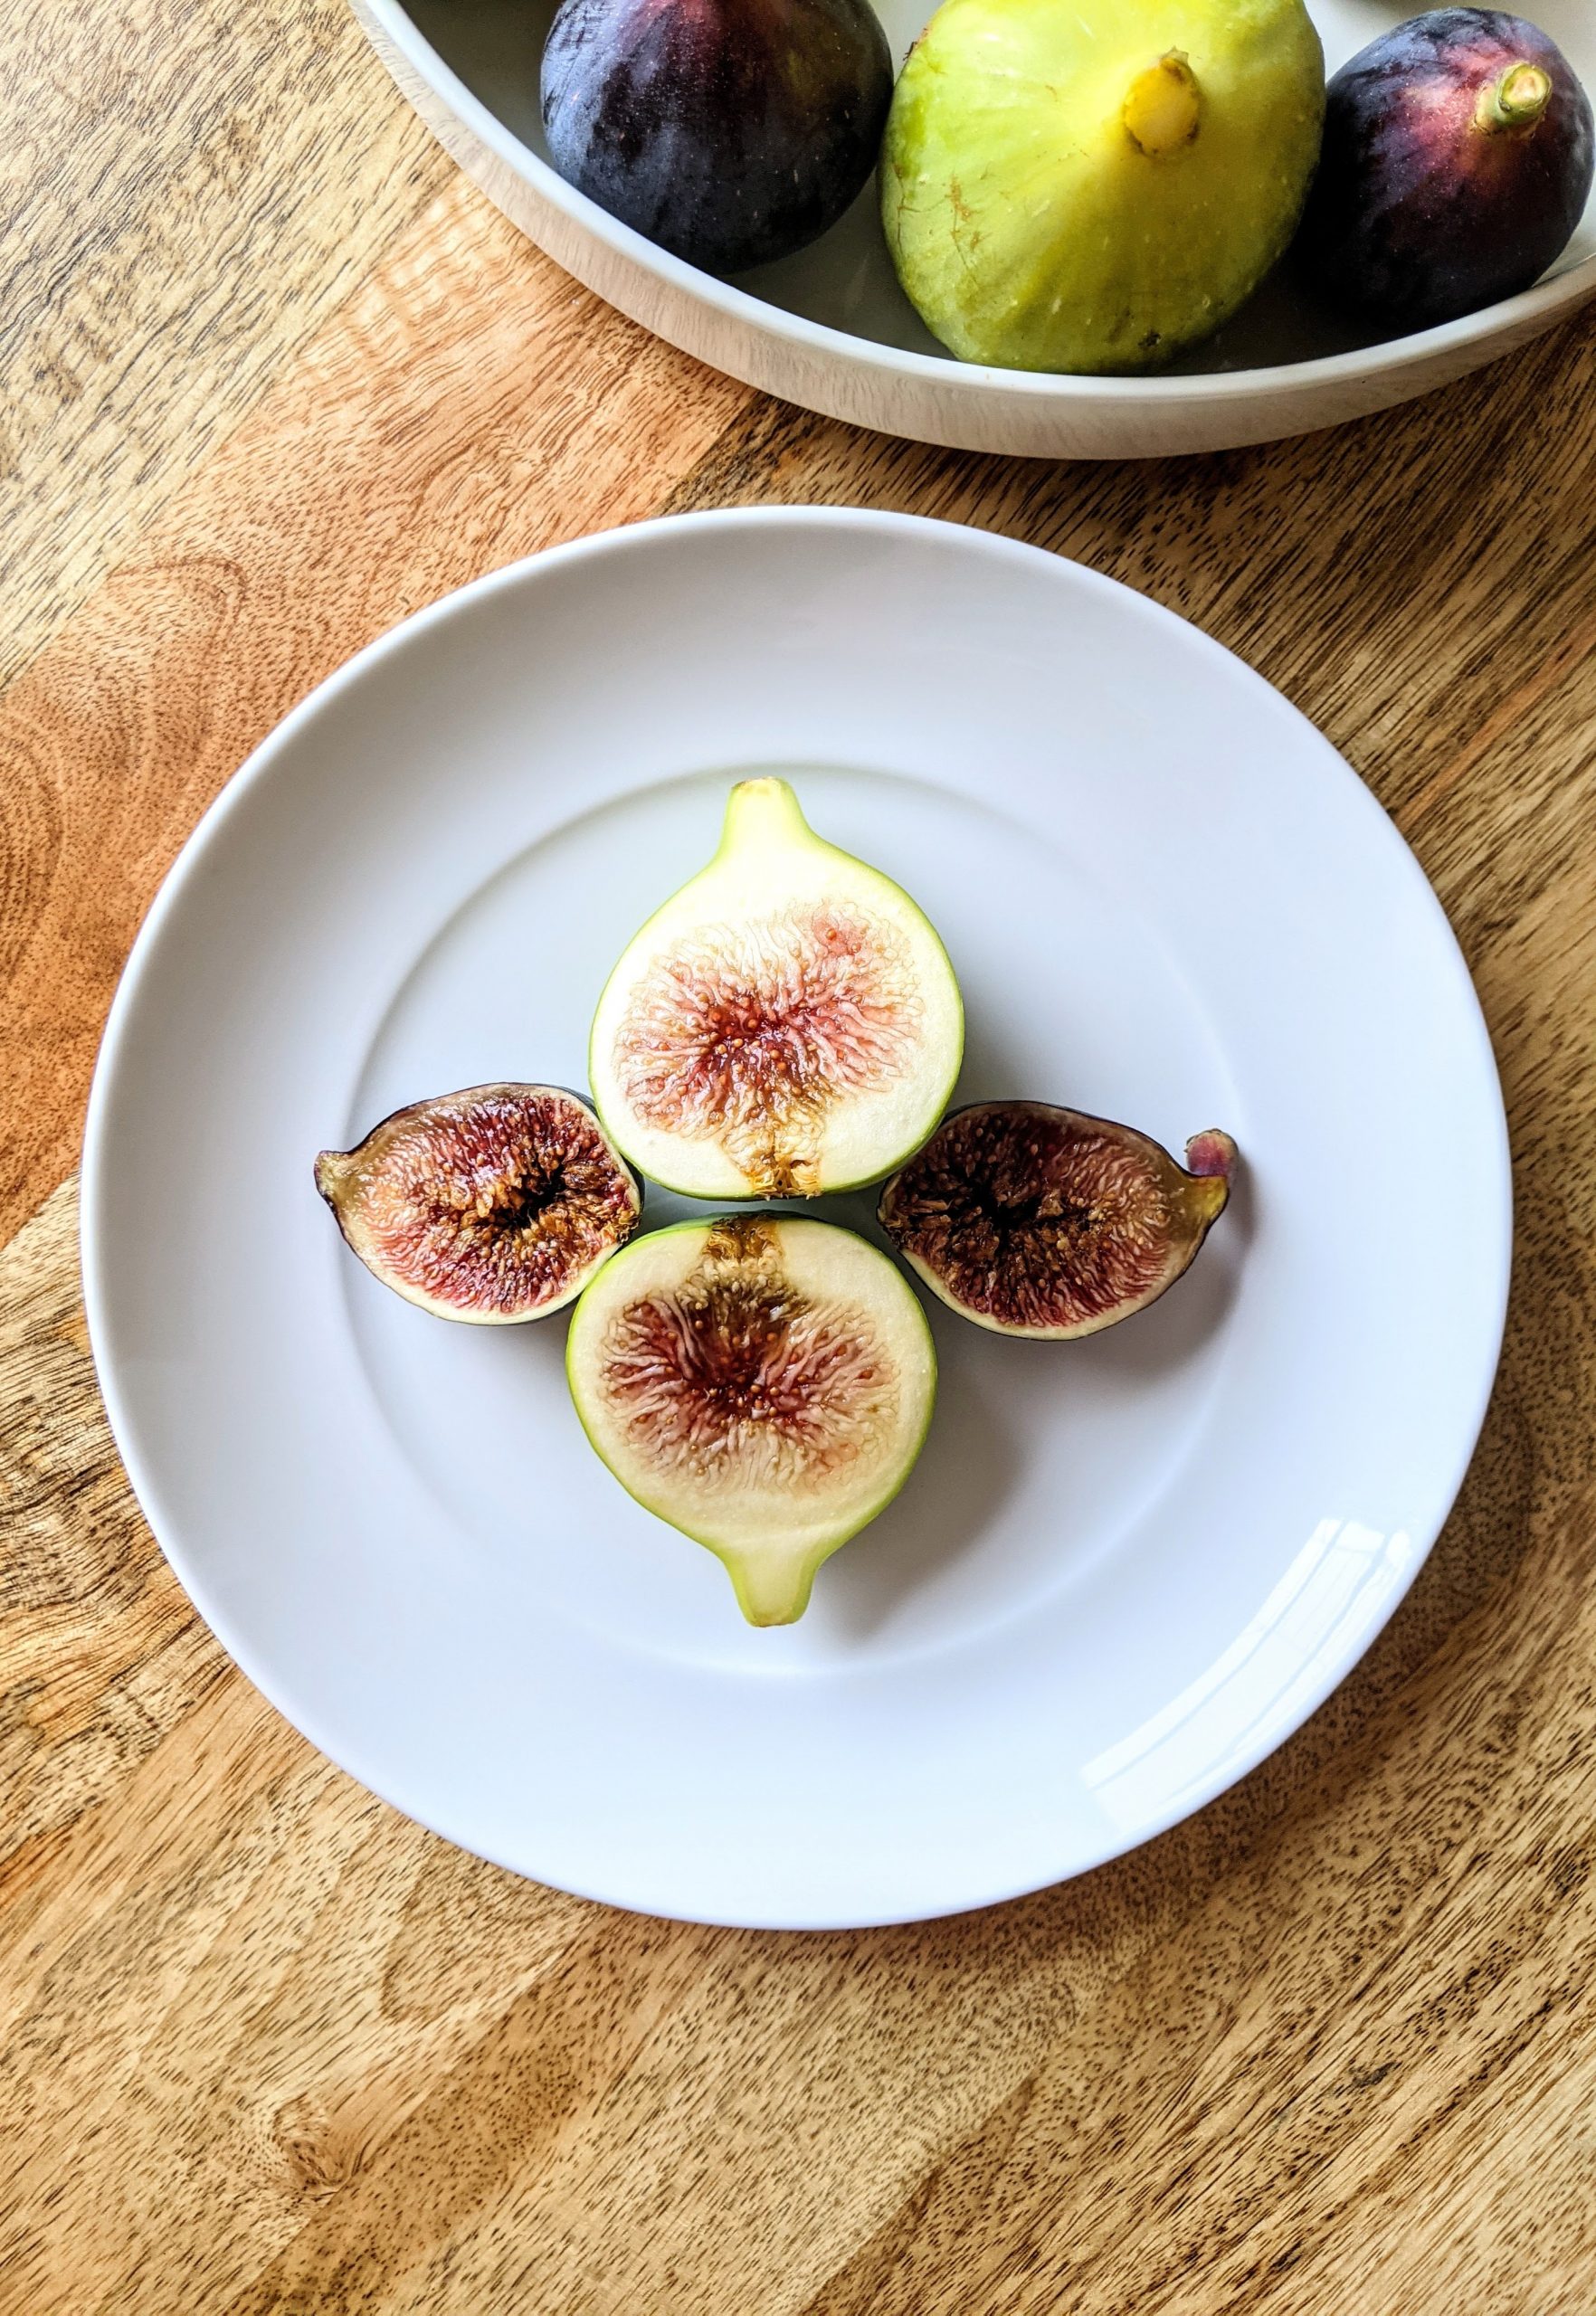 A fresh Tiger fig and a Mission fig sliced in half and placed flesh side up on a small white plate.